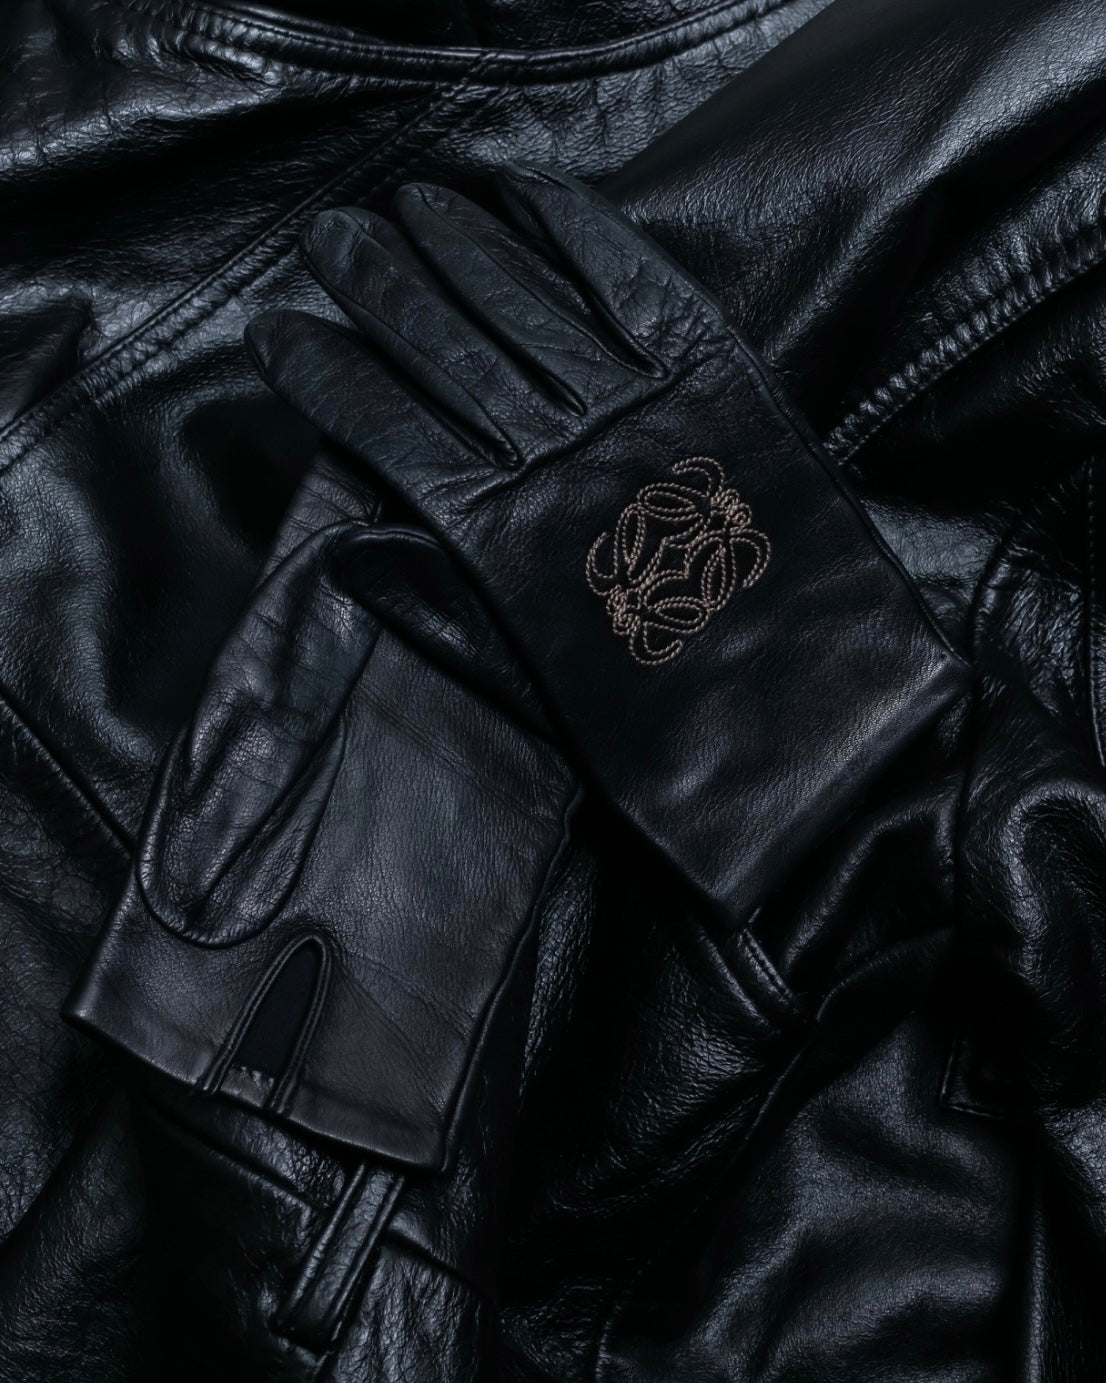 "LOEWE" embroidered leather gloves